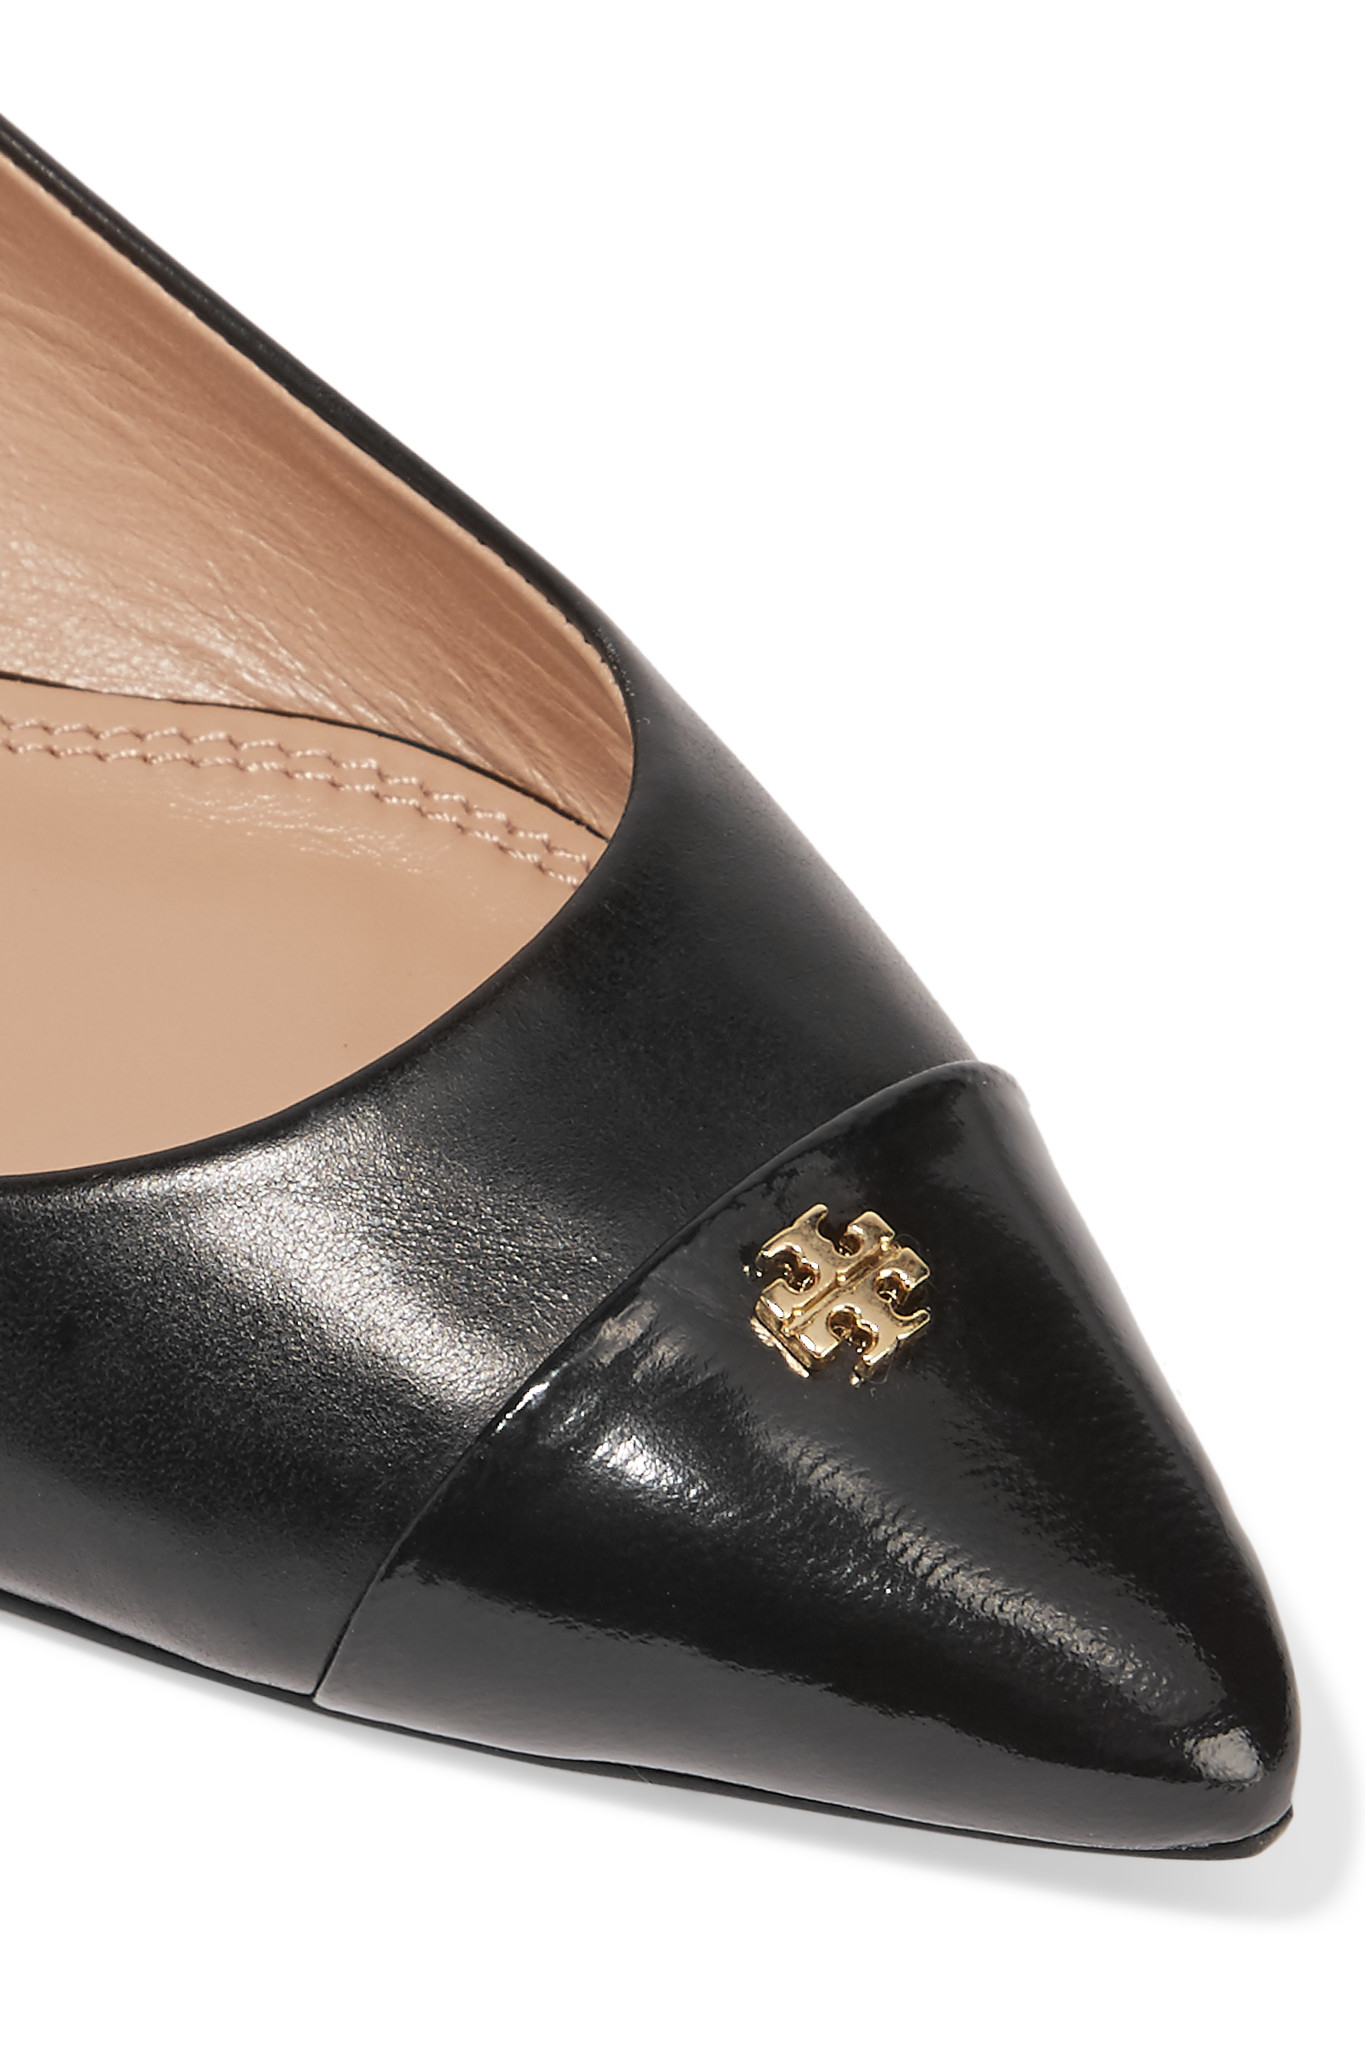 Tory burch Fairford Leather Point-toe Flats in Black | Lyst